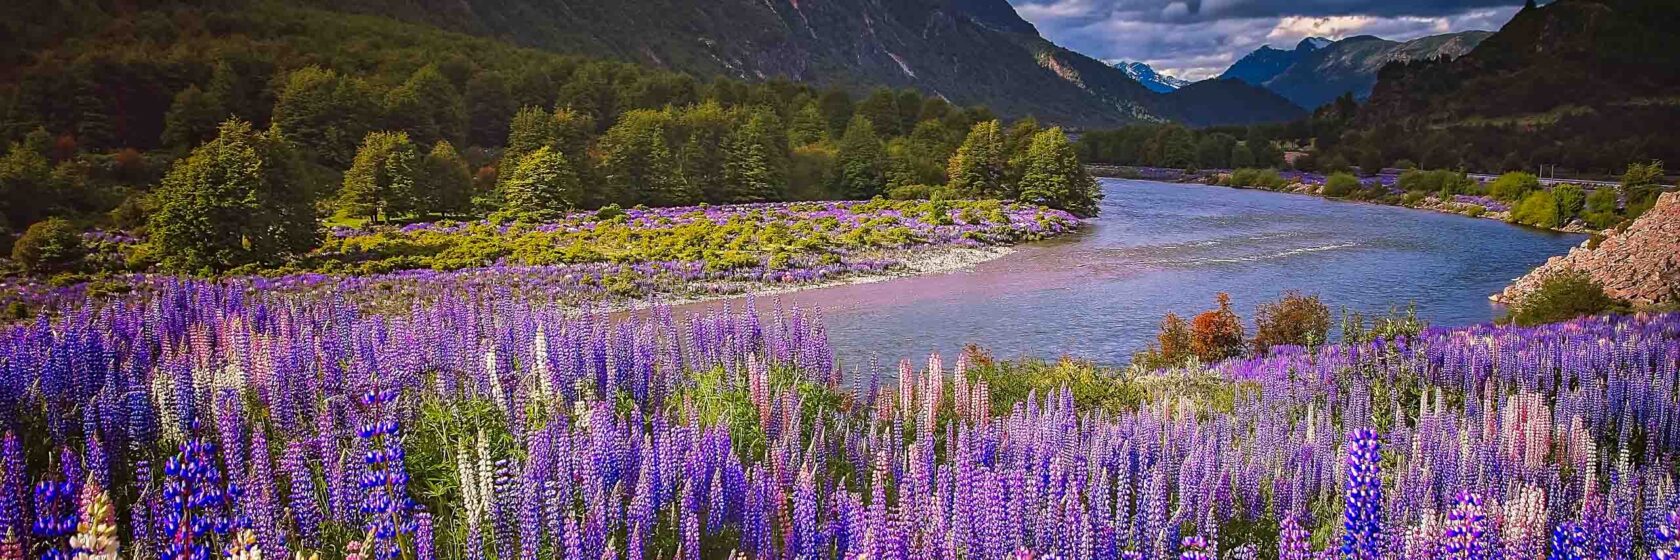 Lupin field and mountain river scenery in Patagonia.